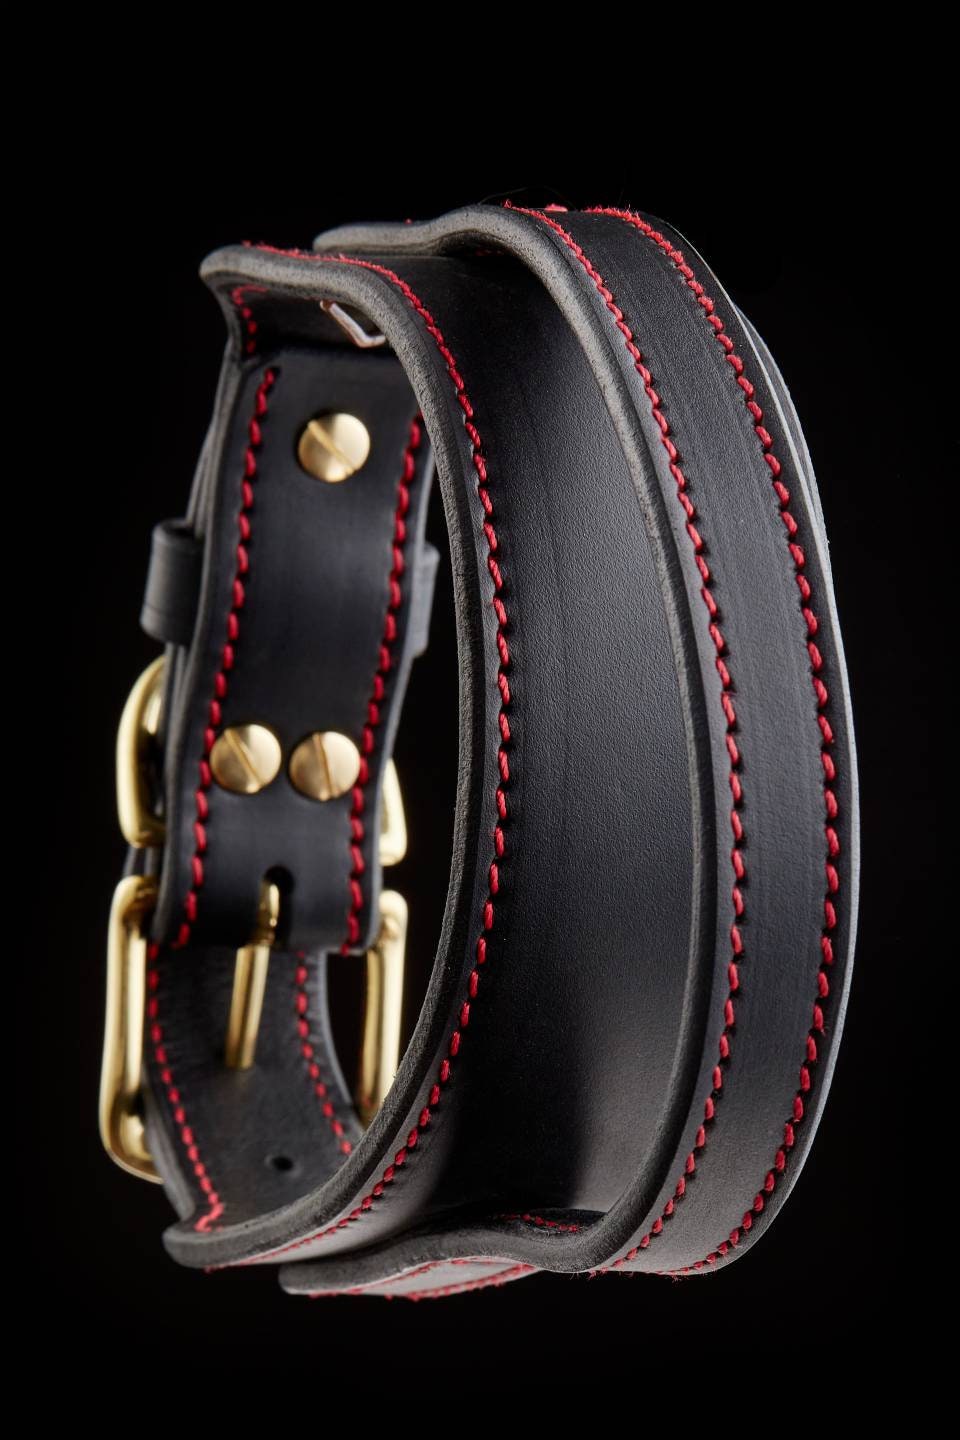 Handle Dog Collar 2 in Wide Leather Collar with Handle 5 cm Wide Leather Dog Collar Padded Black LeatherDog Collar with Red Stitch